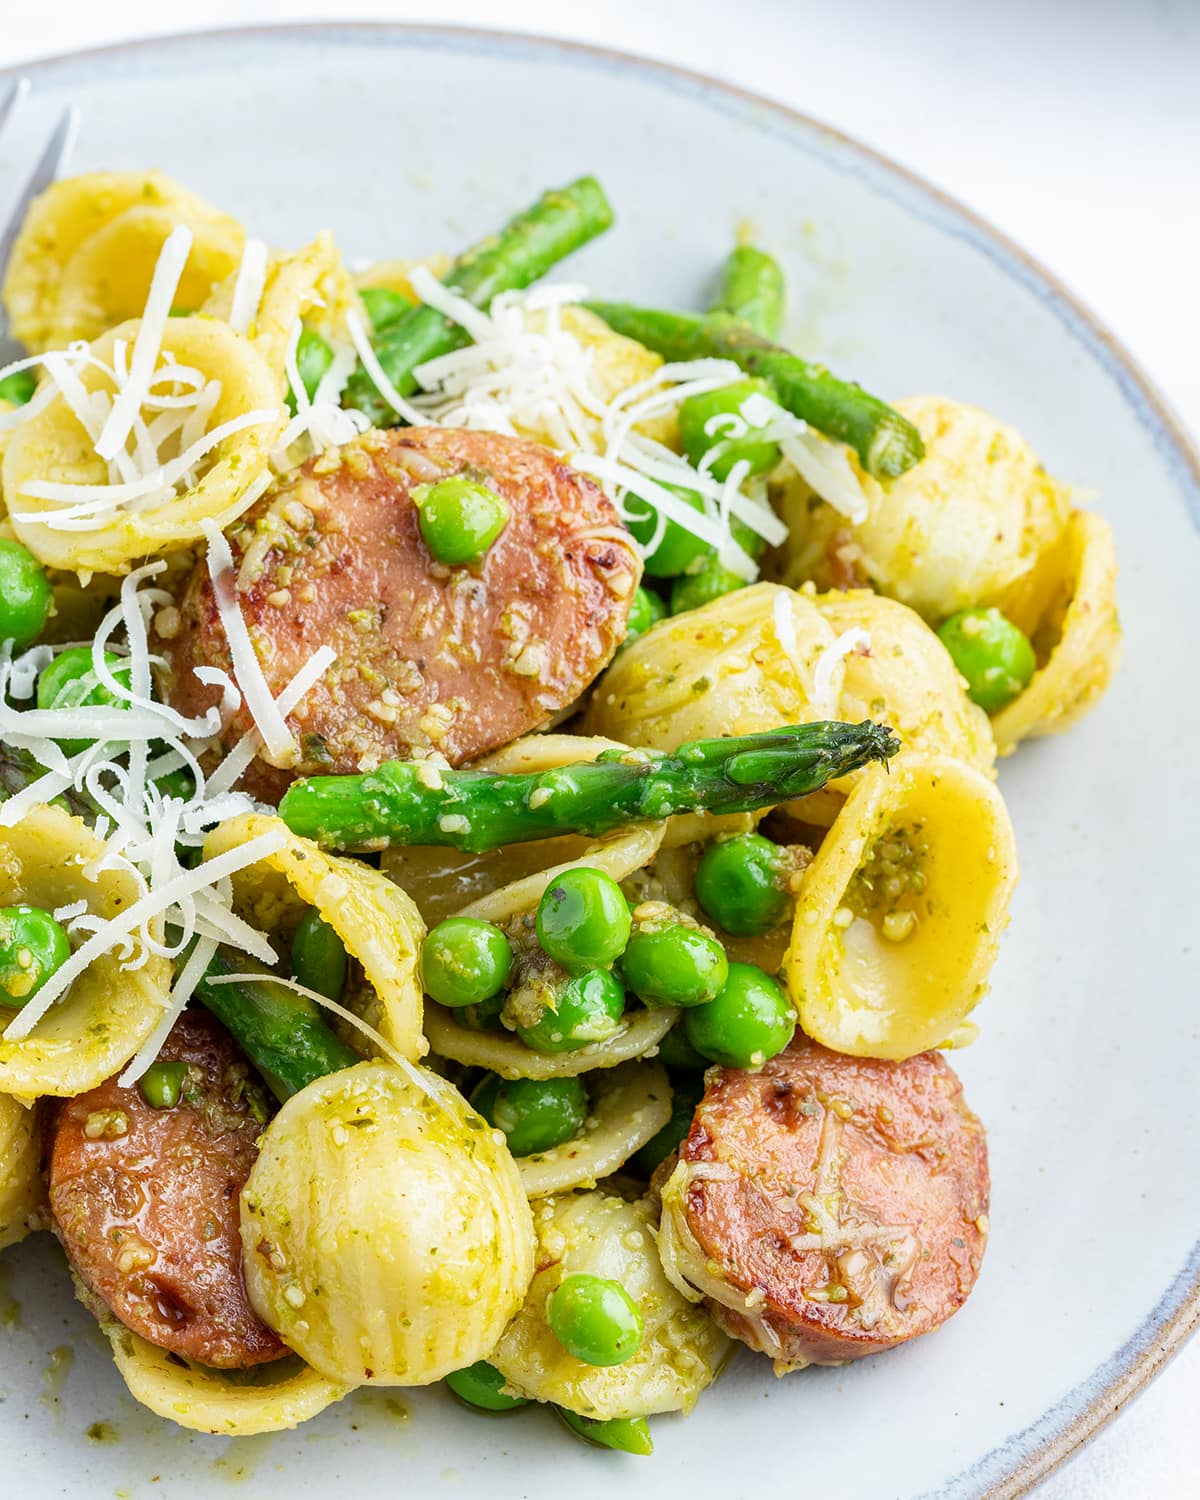 A close up of a plate of chicken sausage, asparagus, and orecchiette pasta.